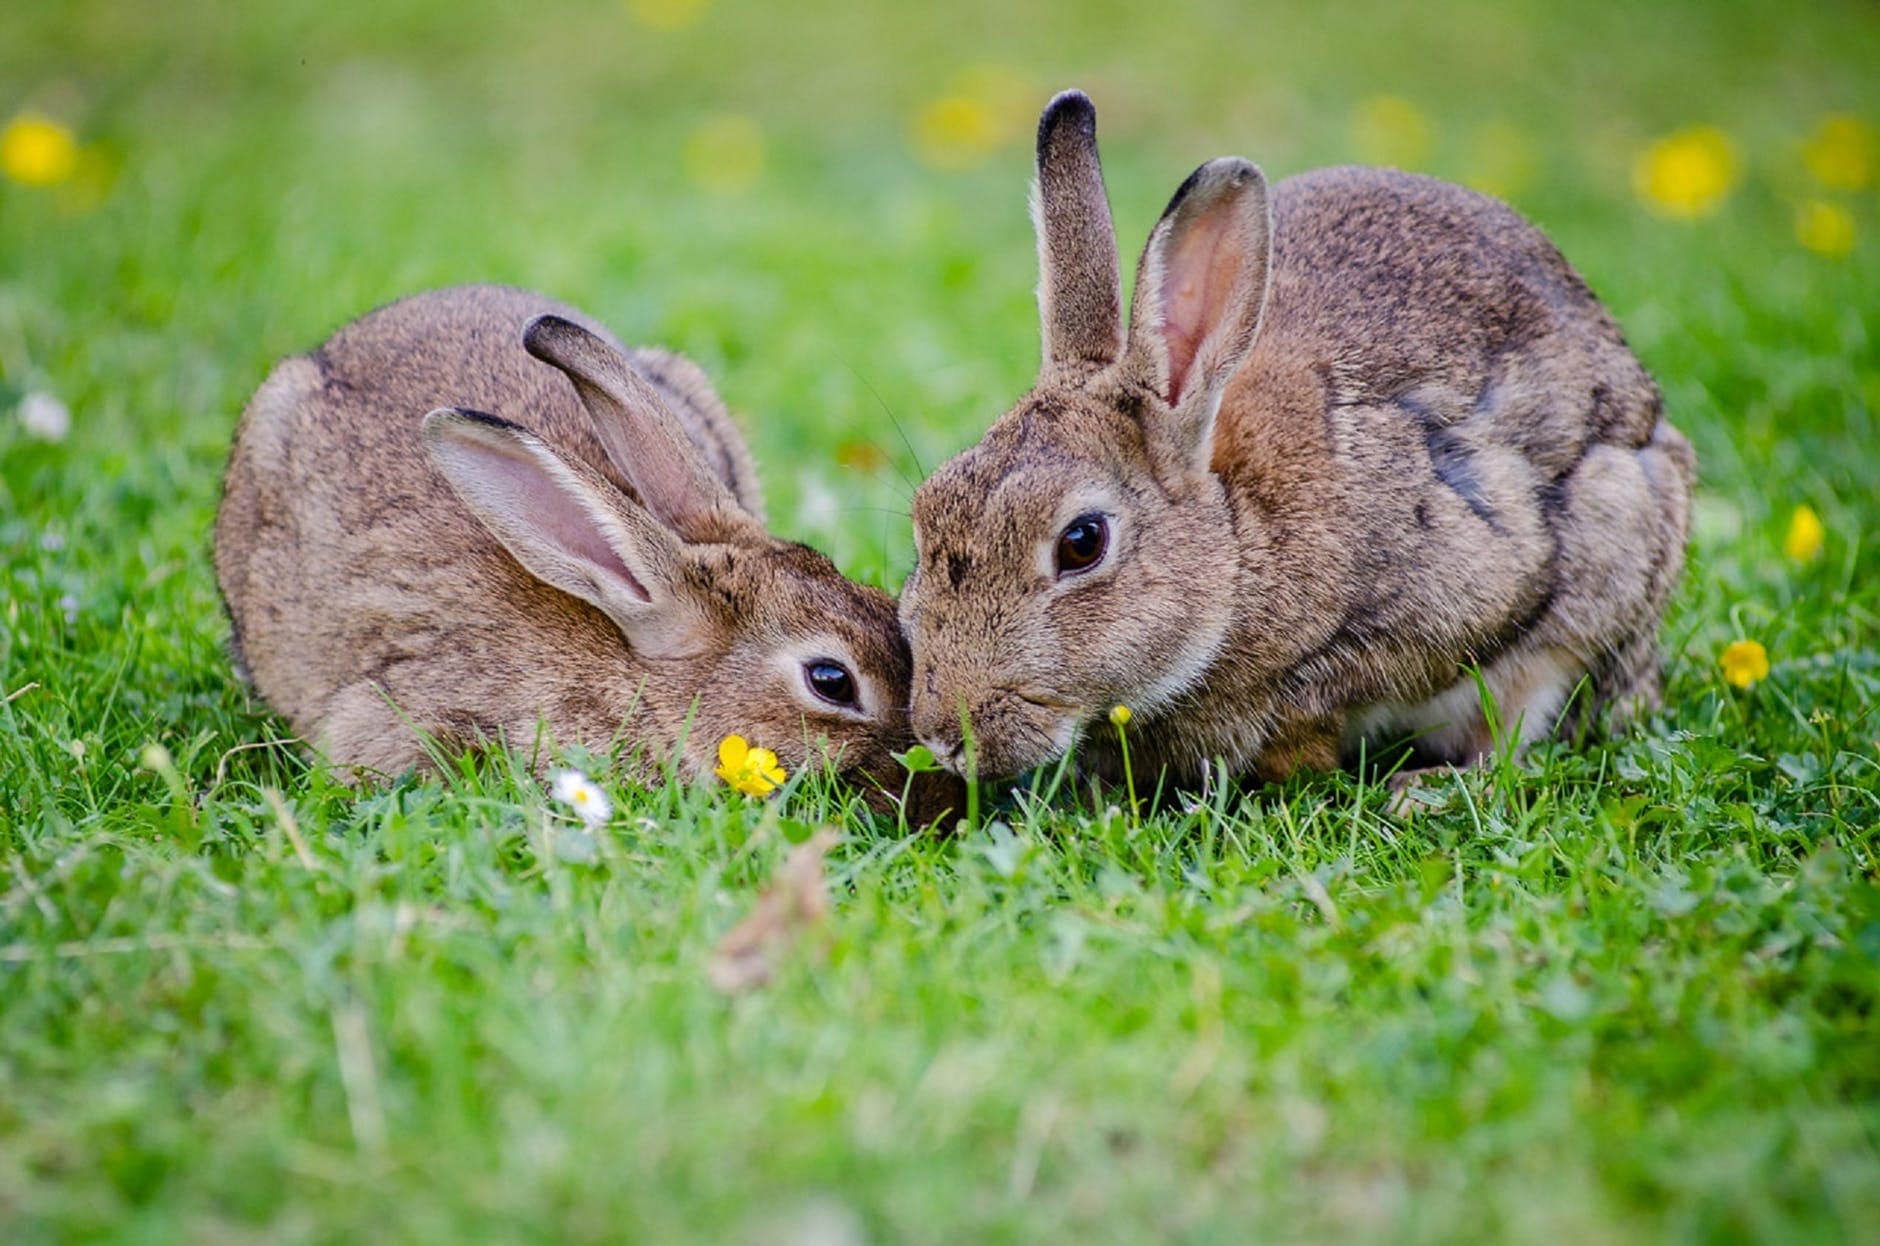 male and female rabbits living together